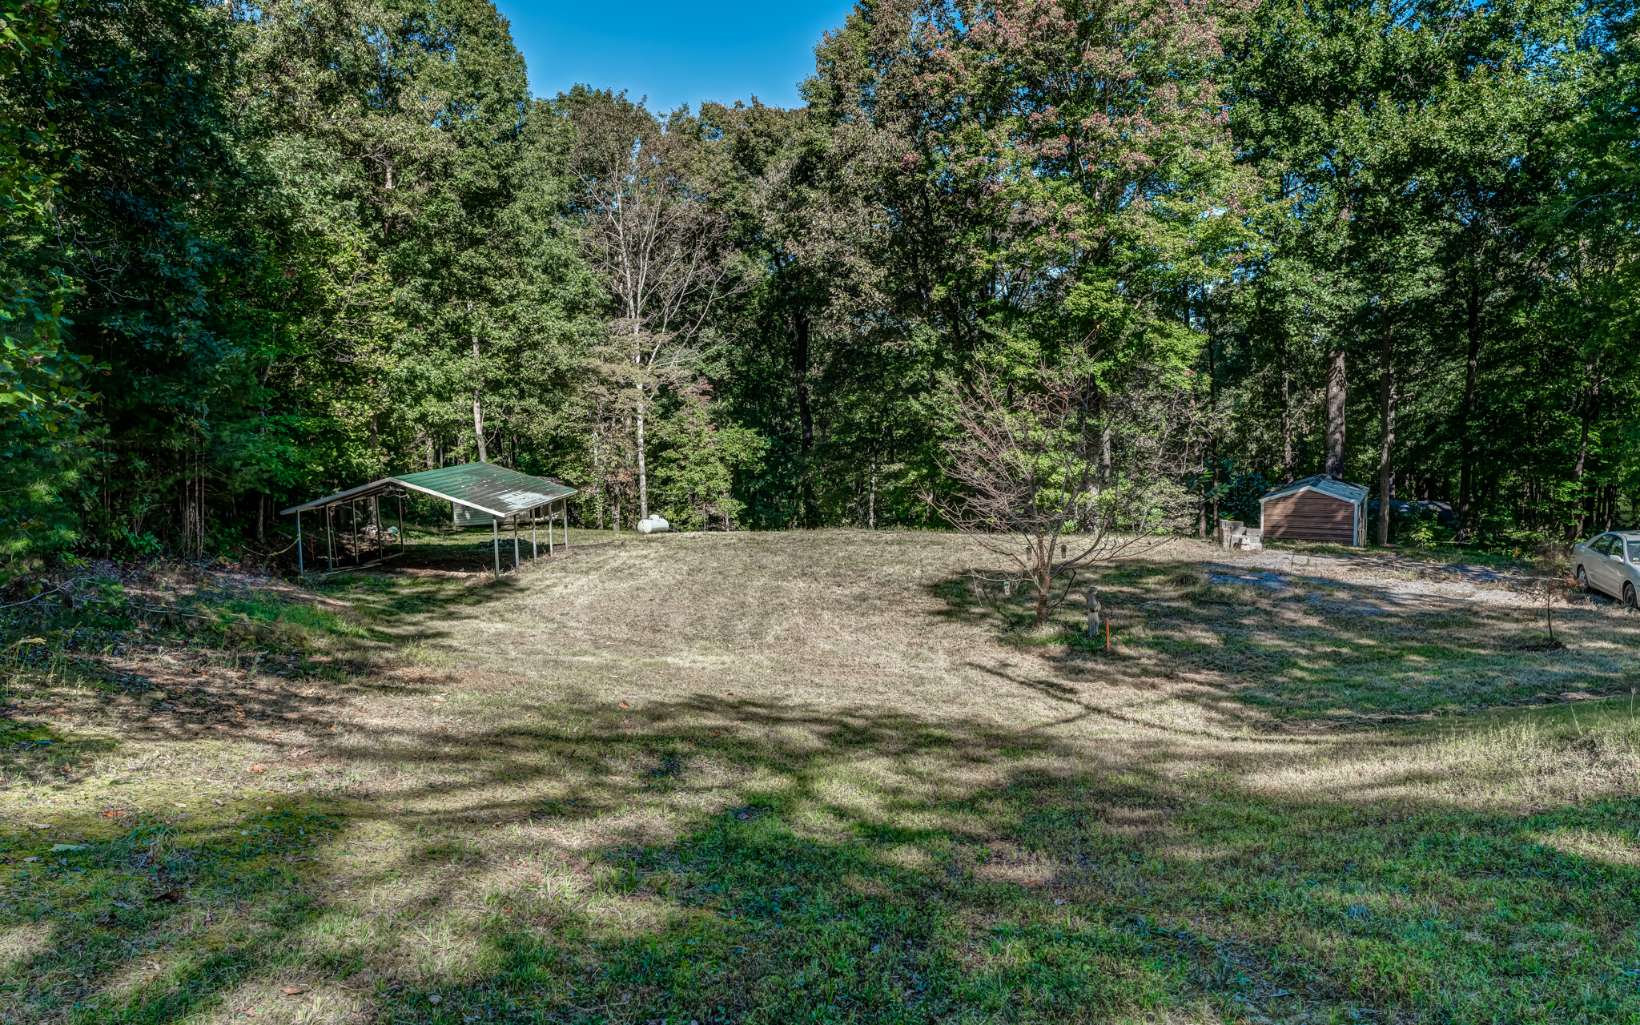 Graded flat, close to town PERFECTION!! This property is literally ready for your home! Three bedroom septic already in place. Well already in place! All it needs is you! Come take a look at this beautiful, sweet spot and know it can be yours!